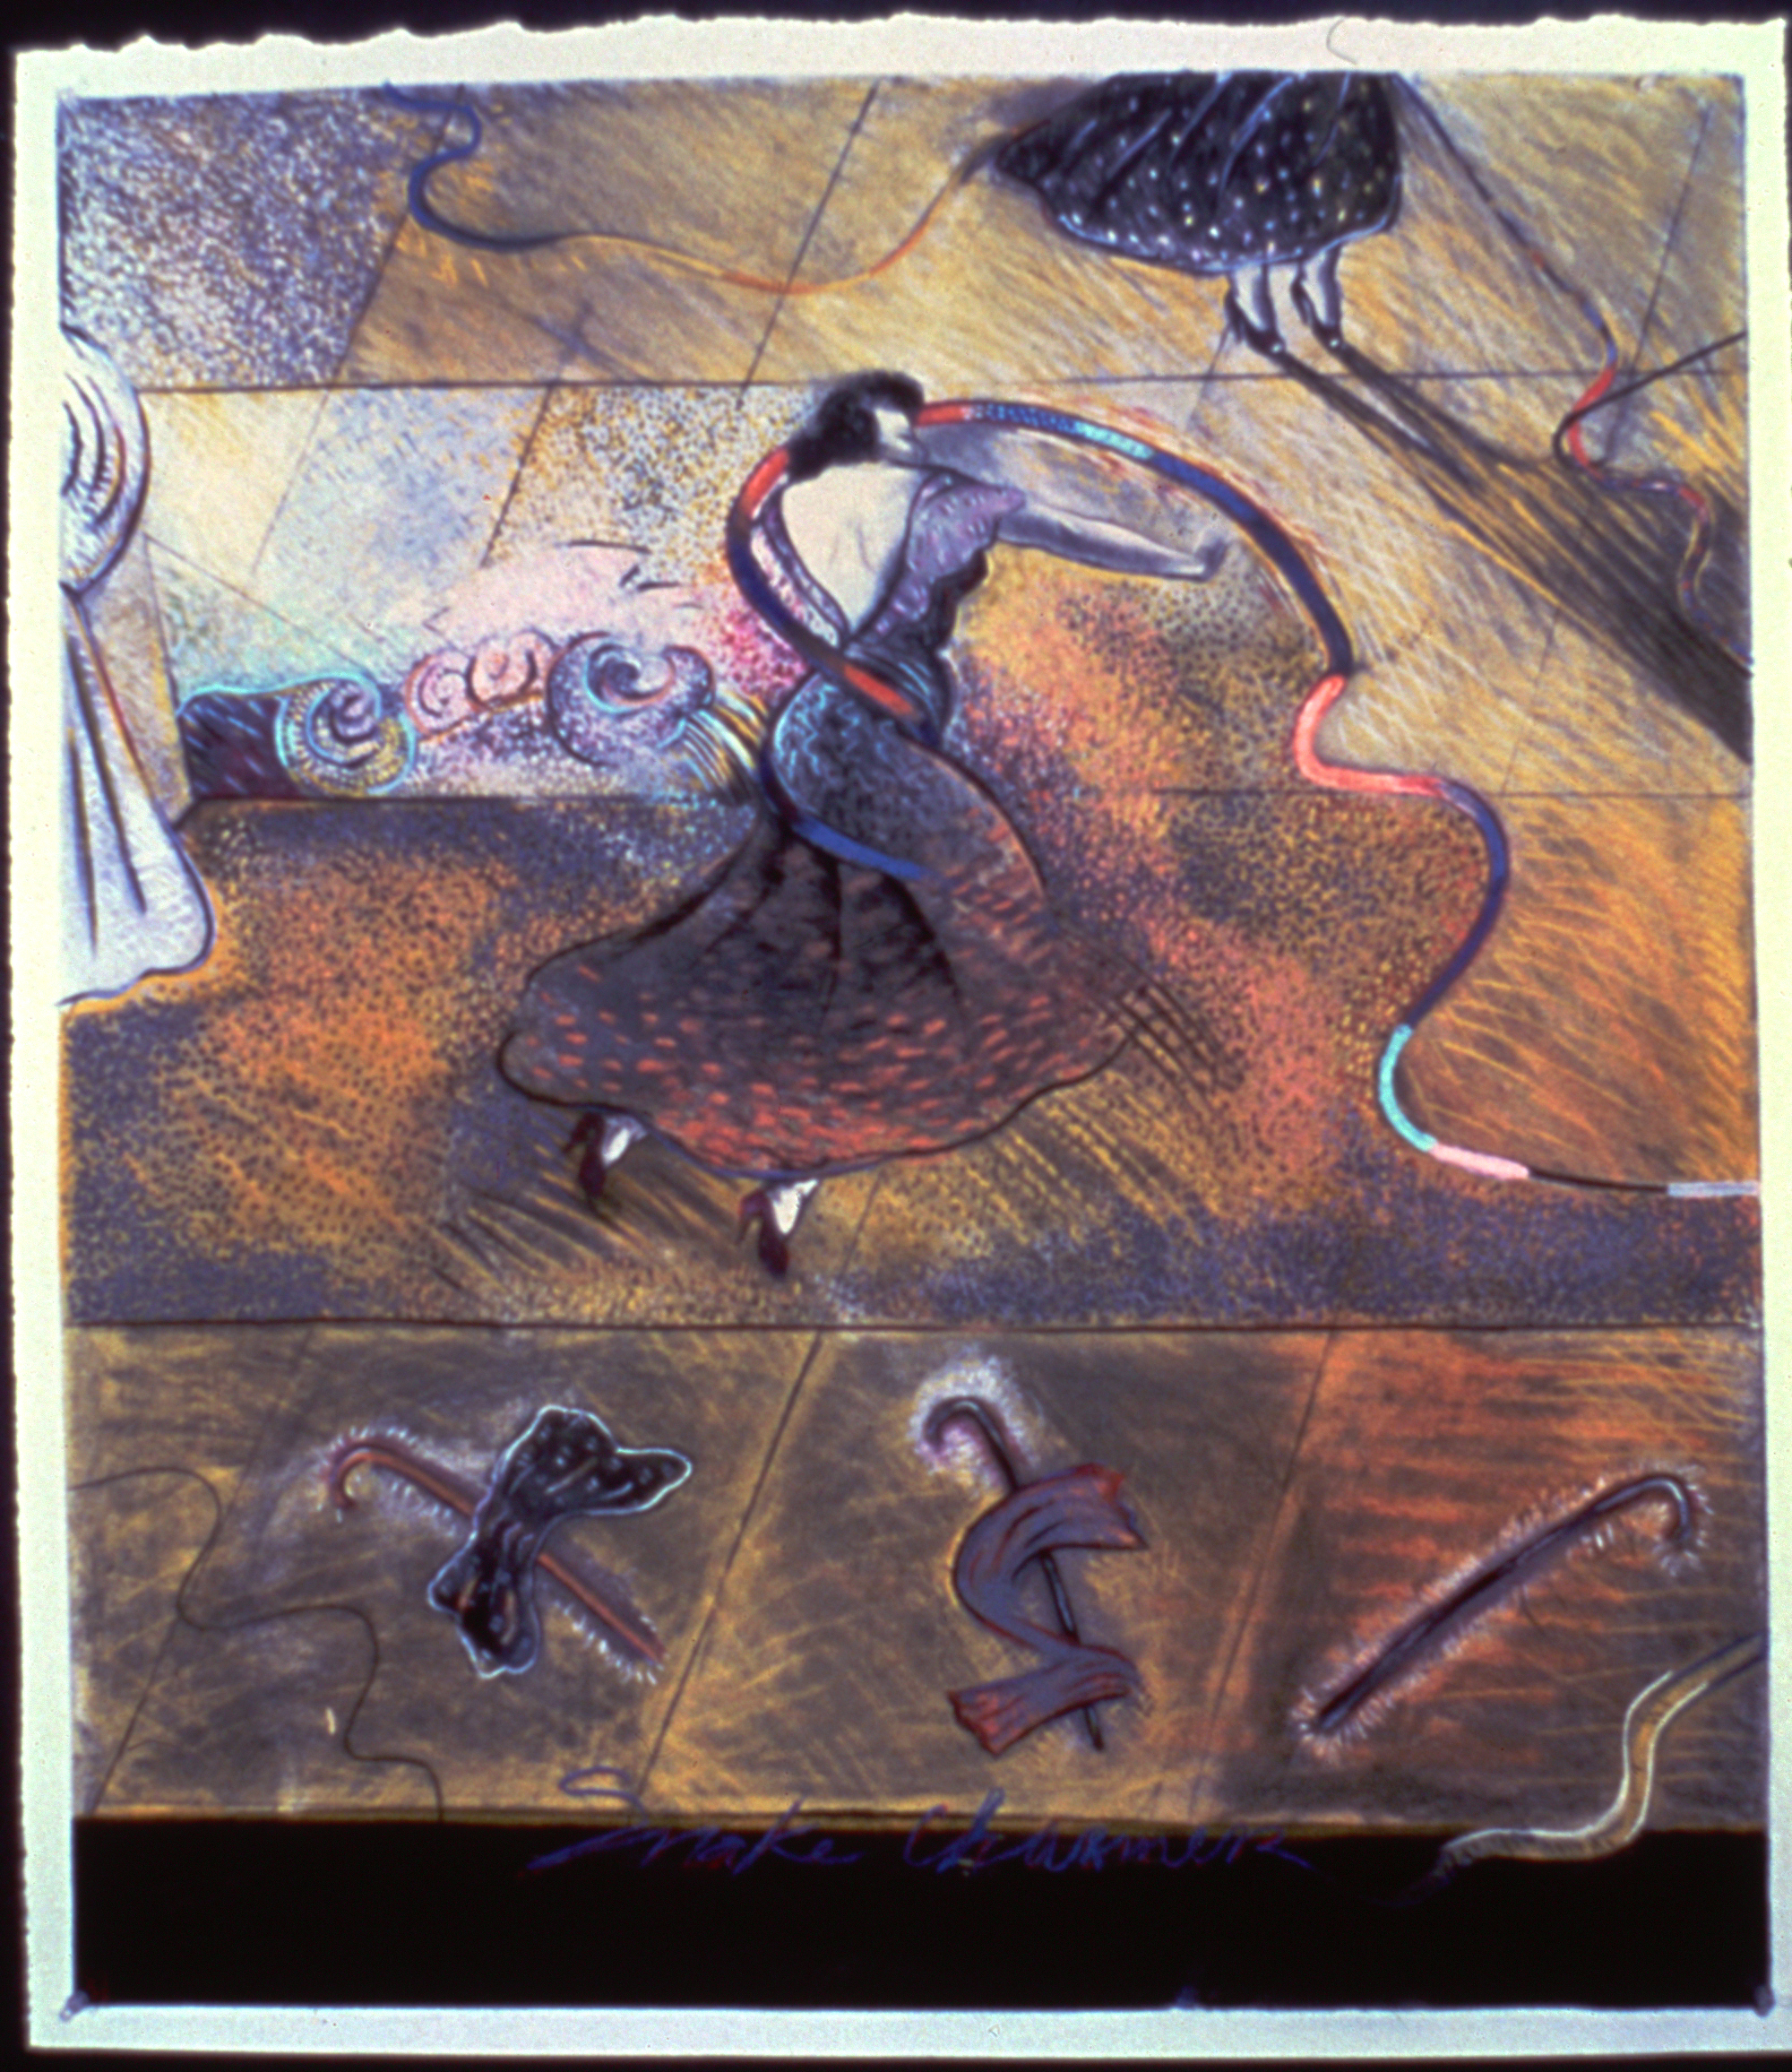 Fall of Eve #1, 45" x 38", pastel on paper, 1979